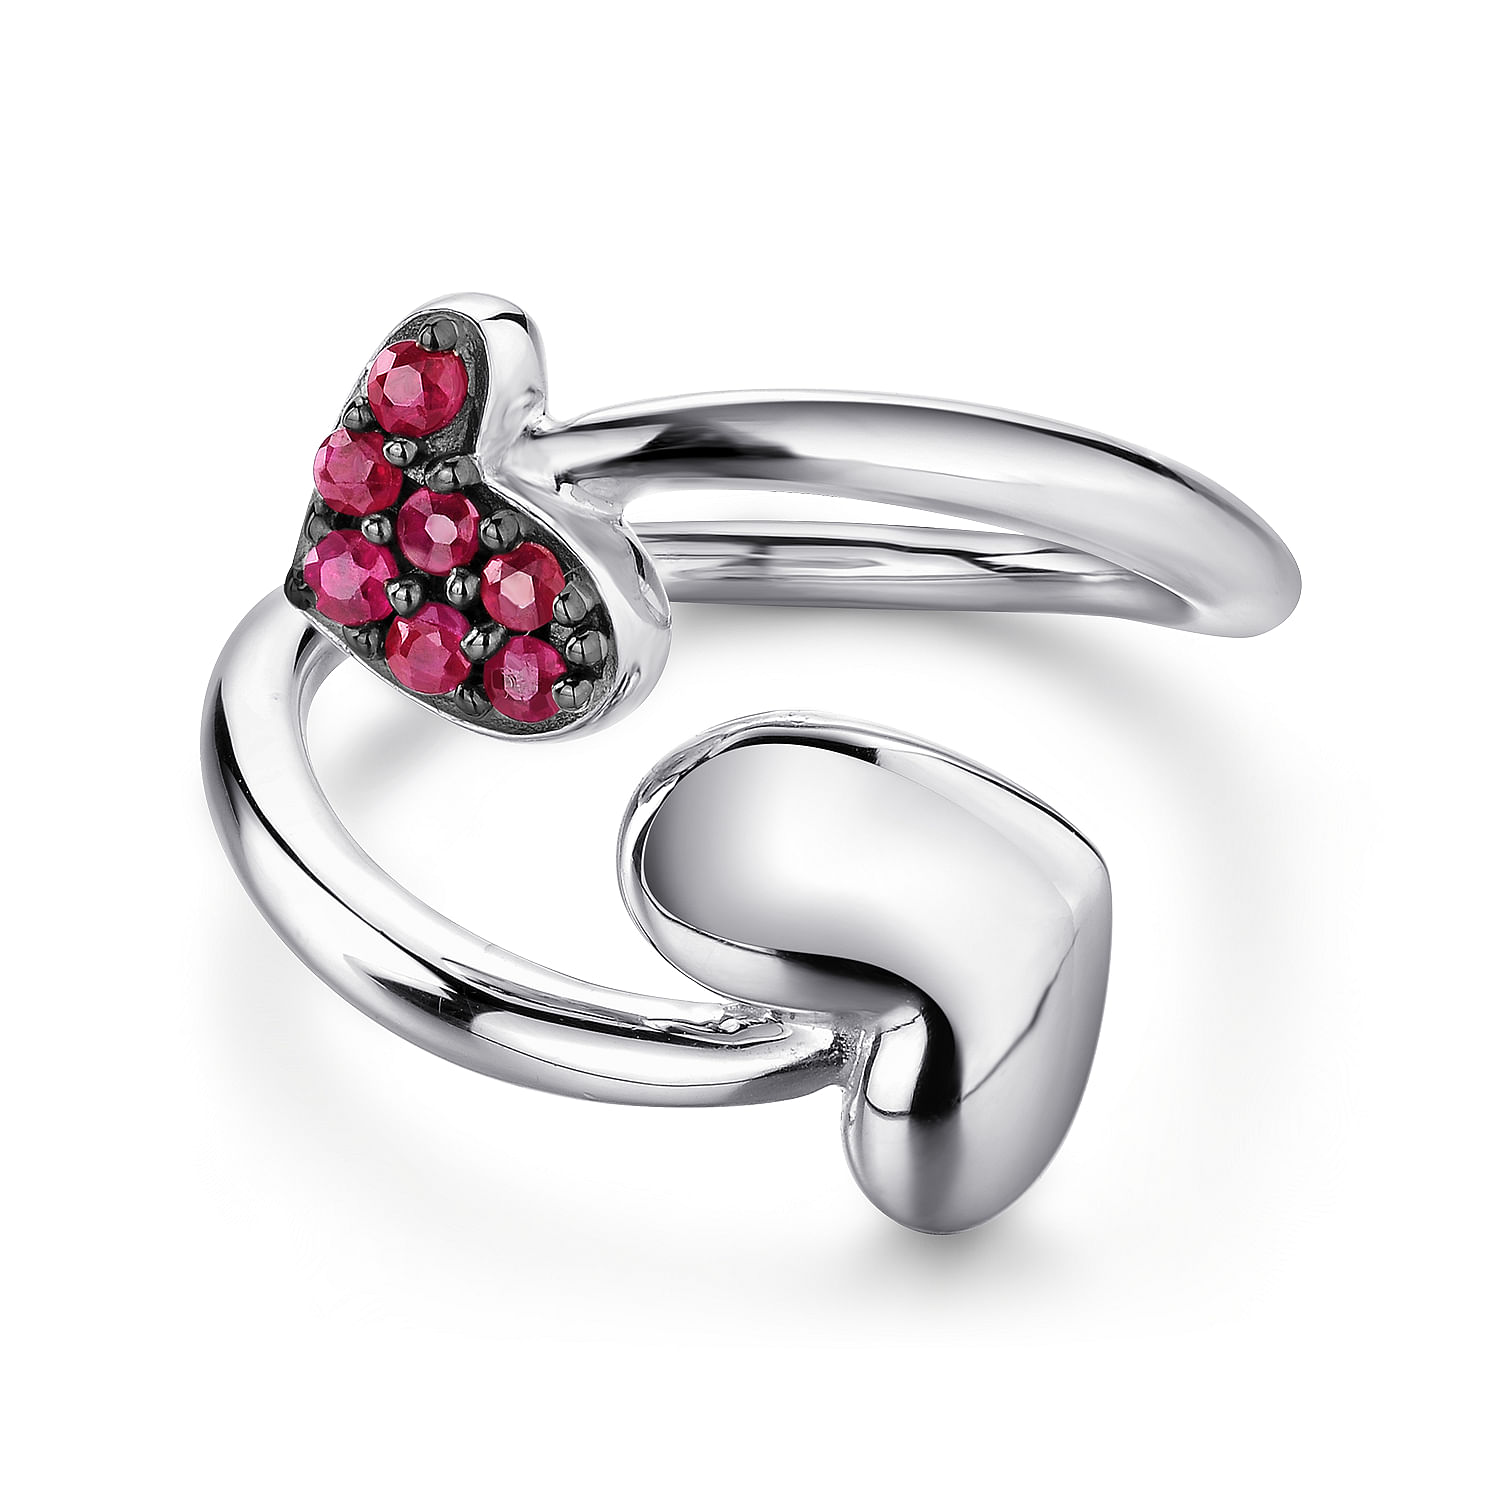 925 Sterling Silver Bypass Heart Ring with Ruby Stones